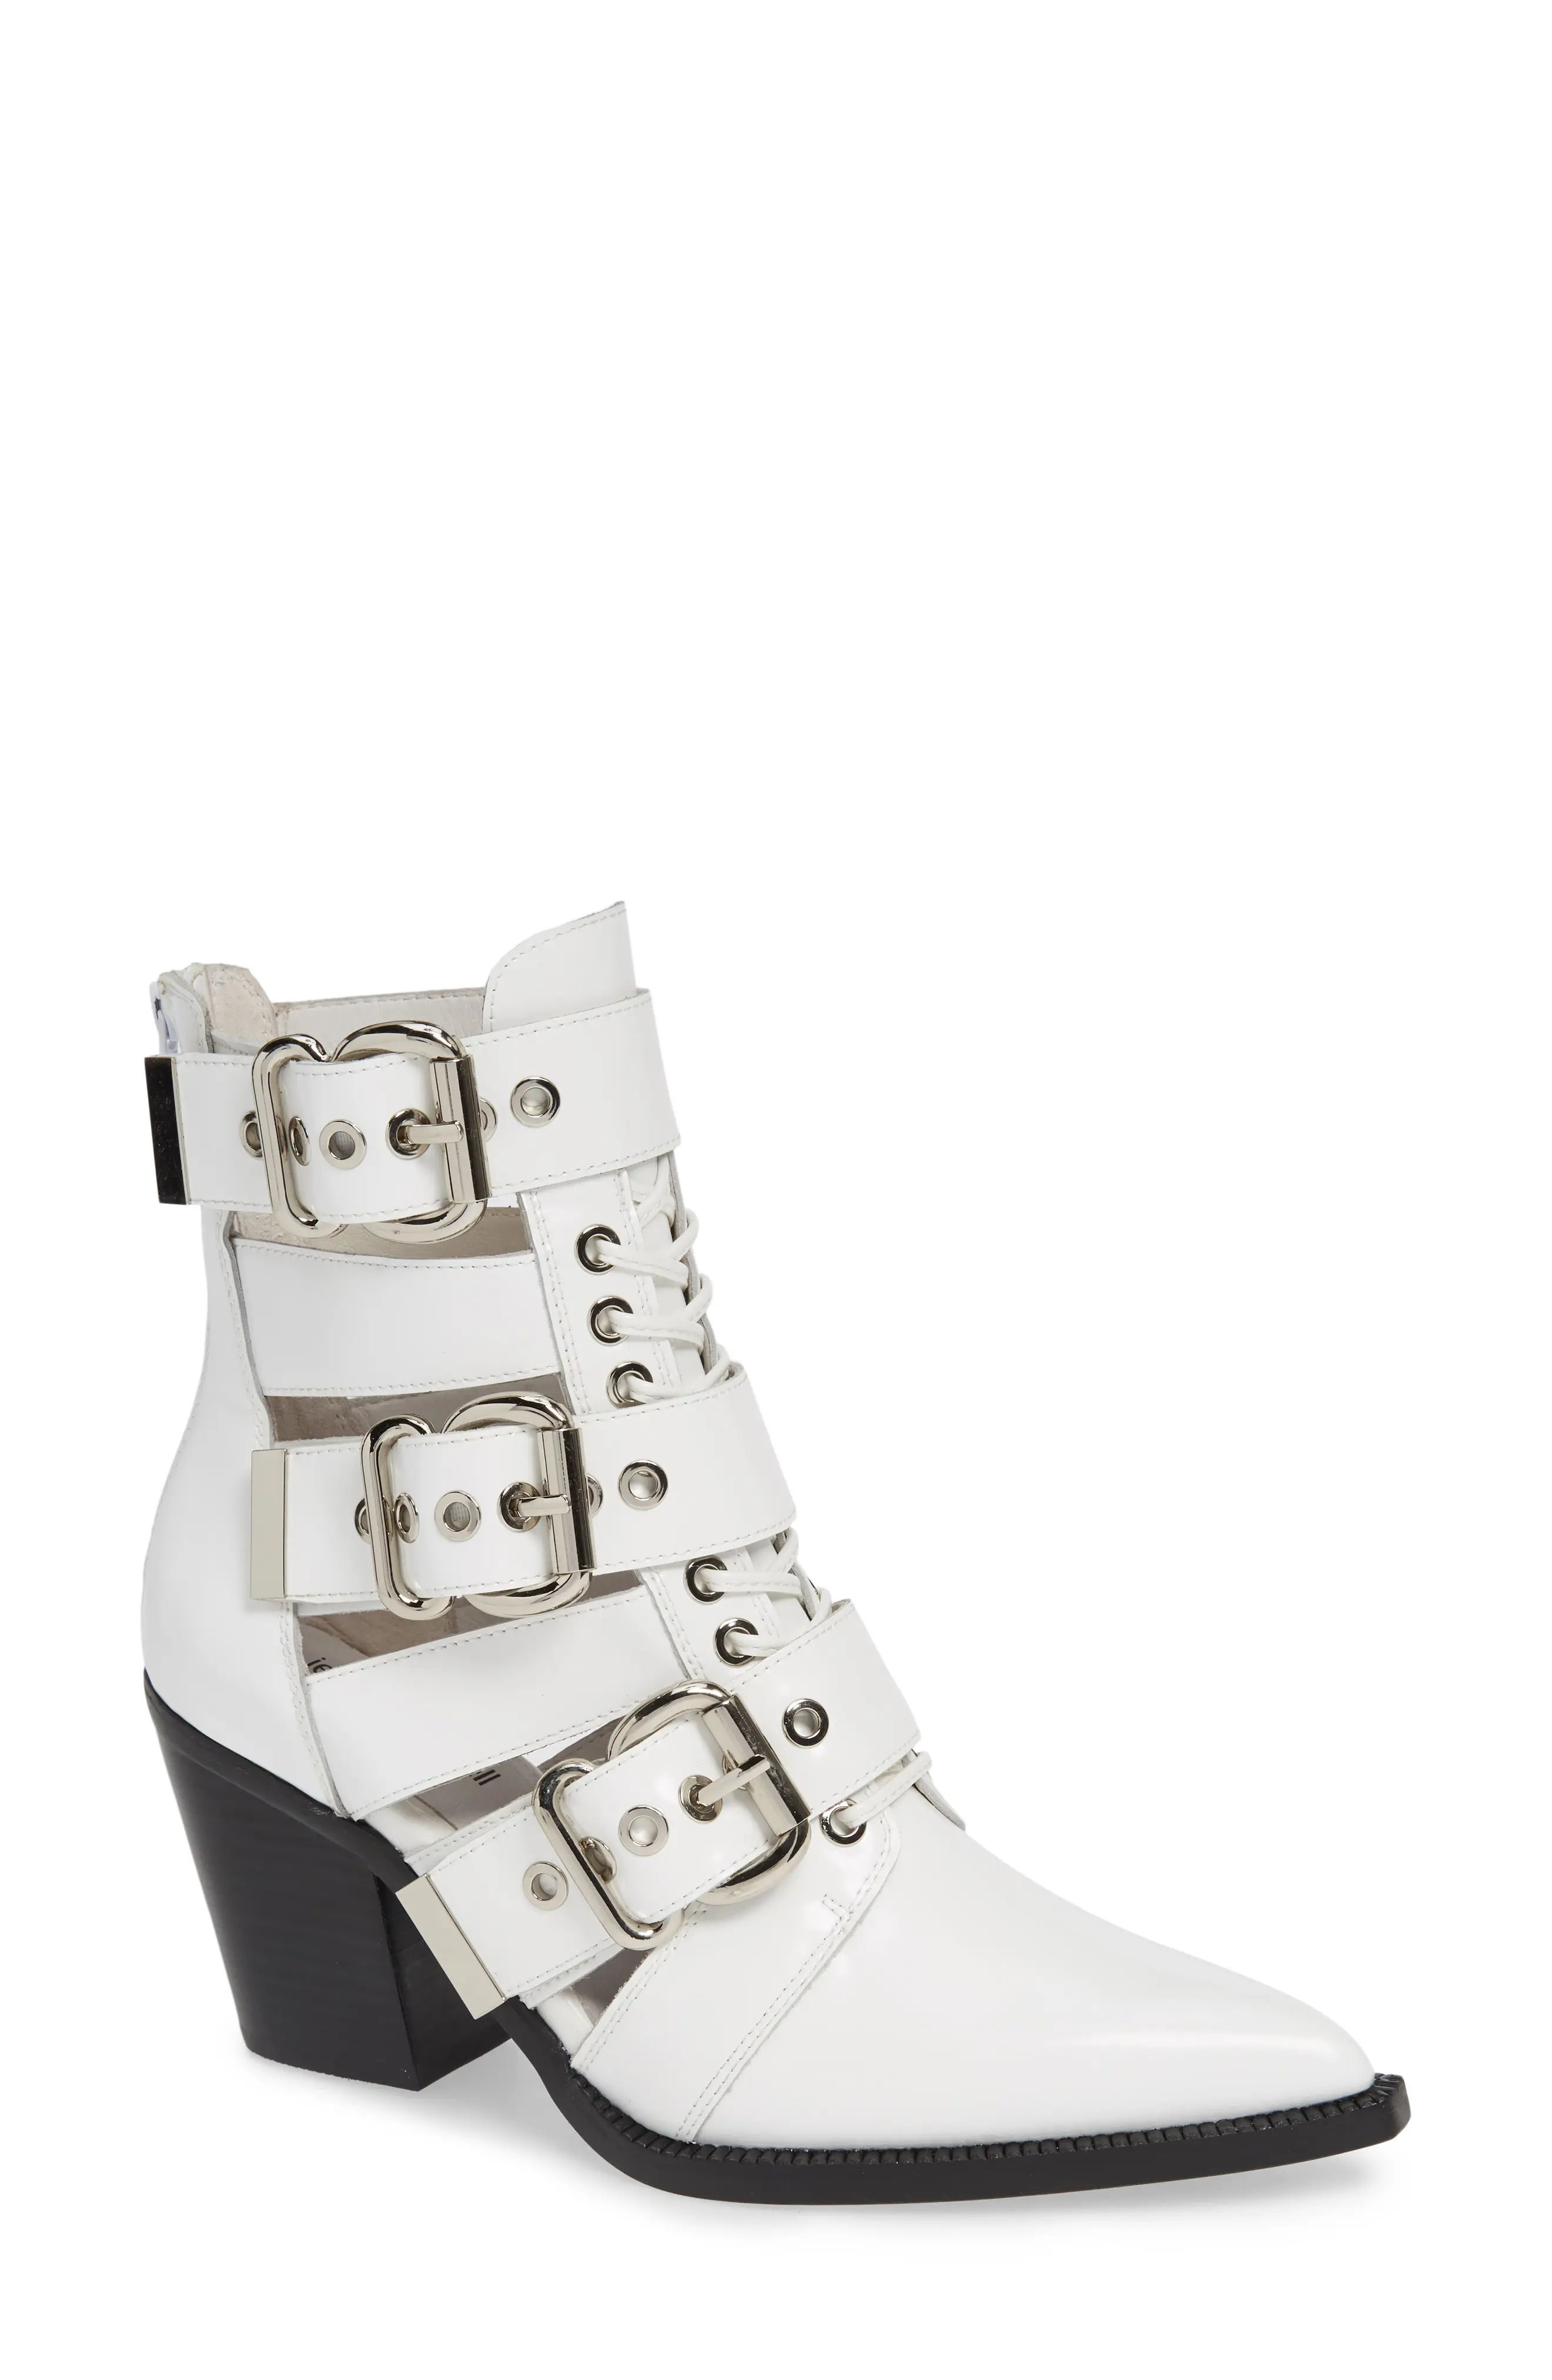 Women's Jeffrey Campbell Caceres Bootie, Size 9 M - White | Nordstrom